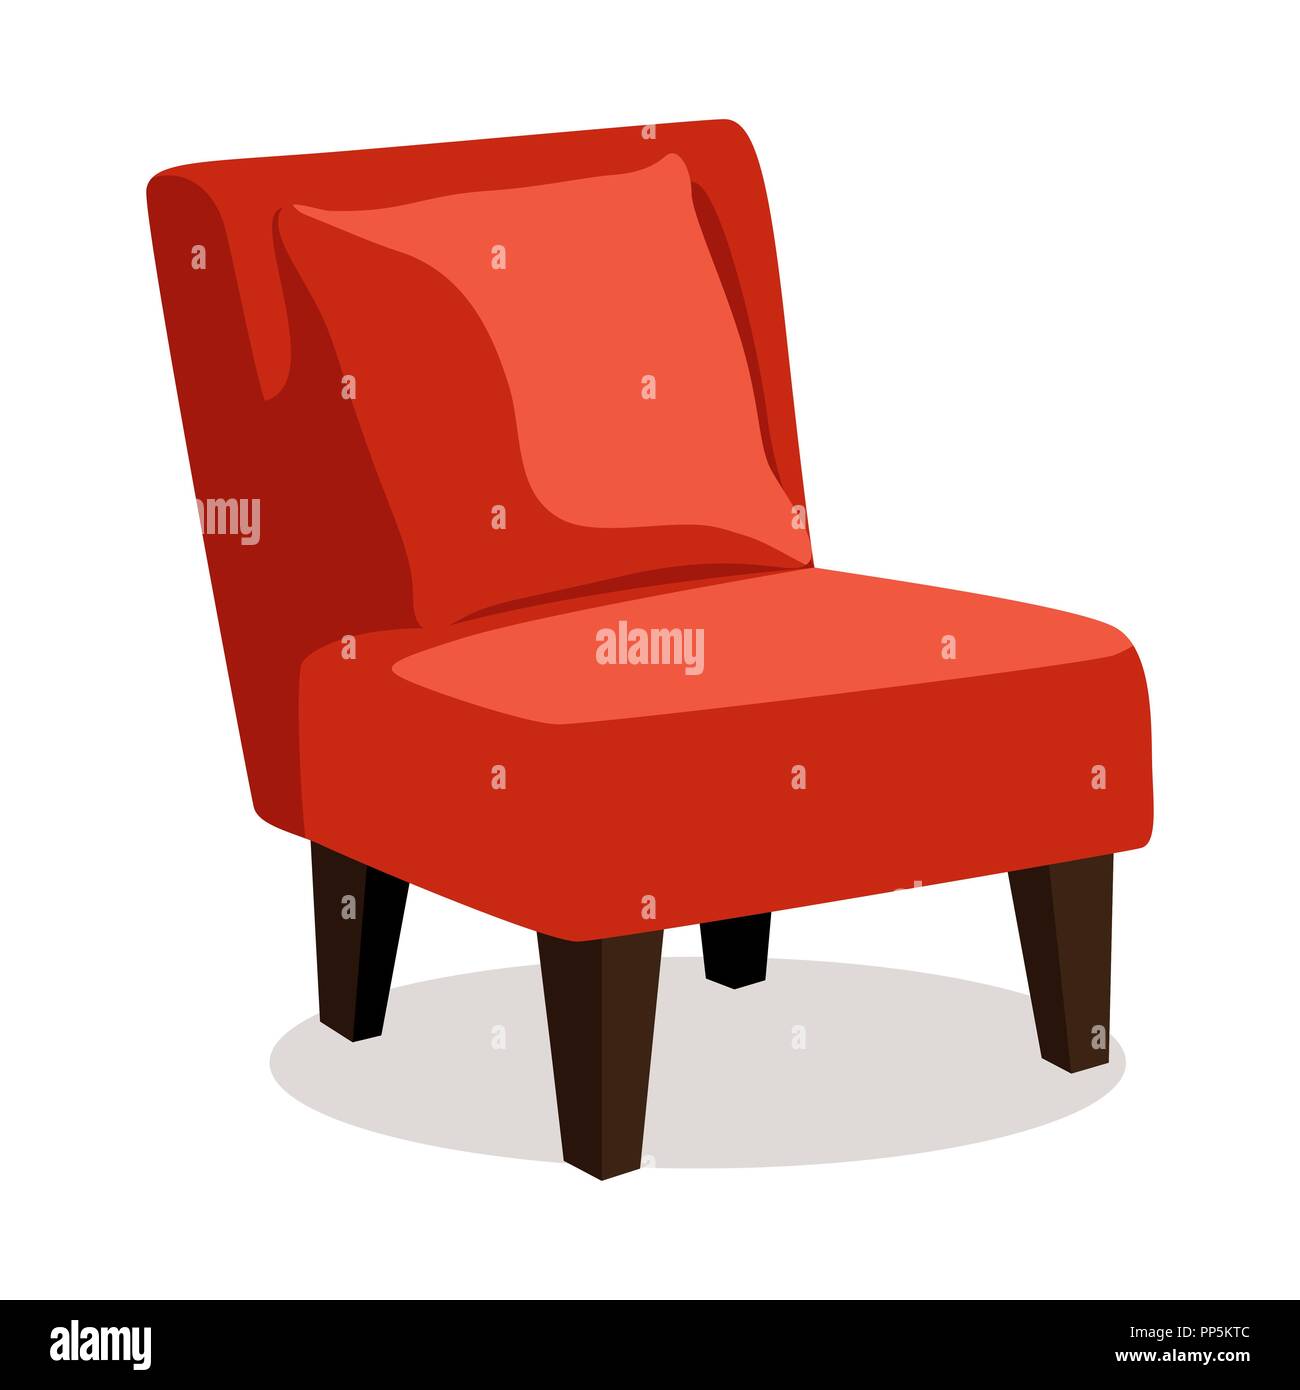 Modern red soft armchair with upholstery - interior design element isolated on white background. Stock Vector